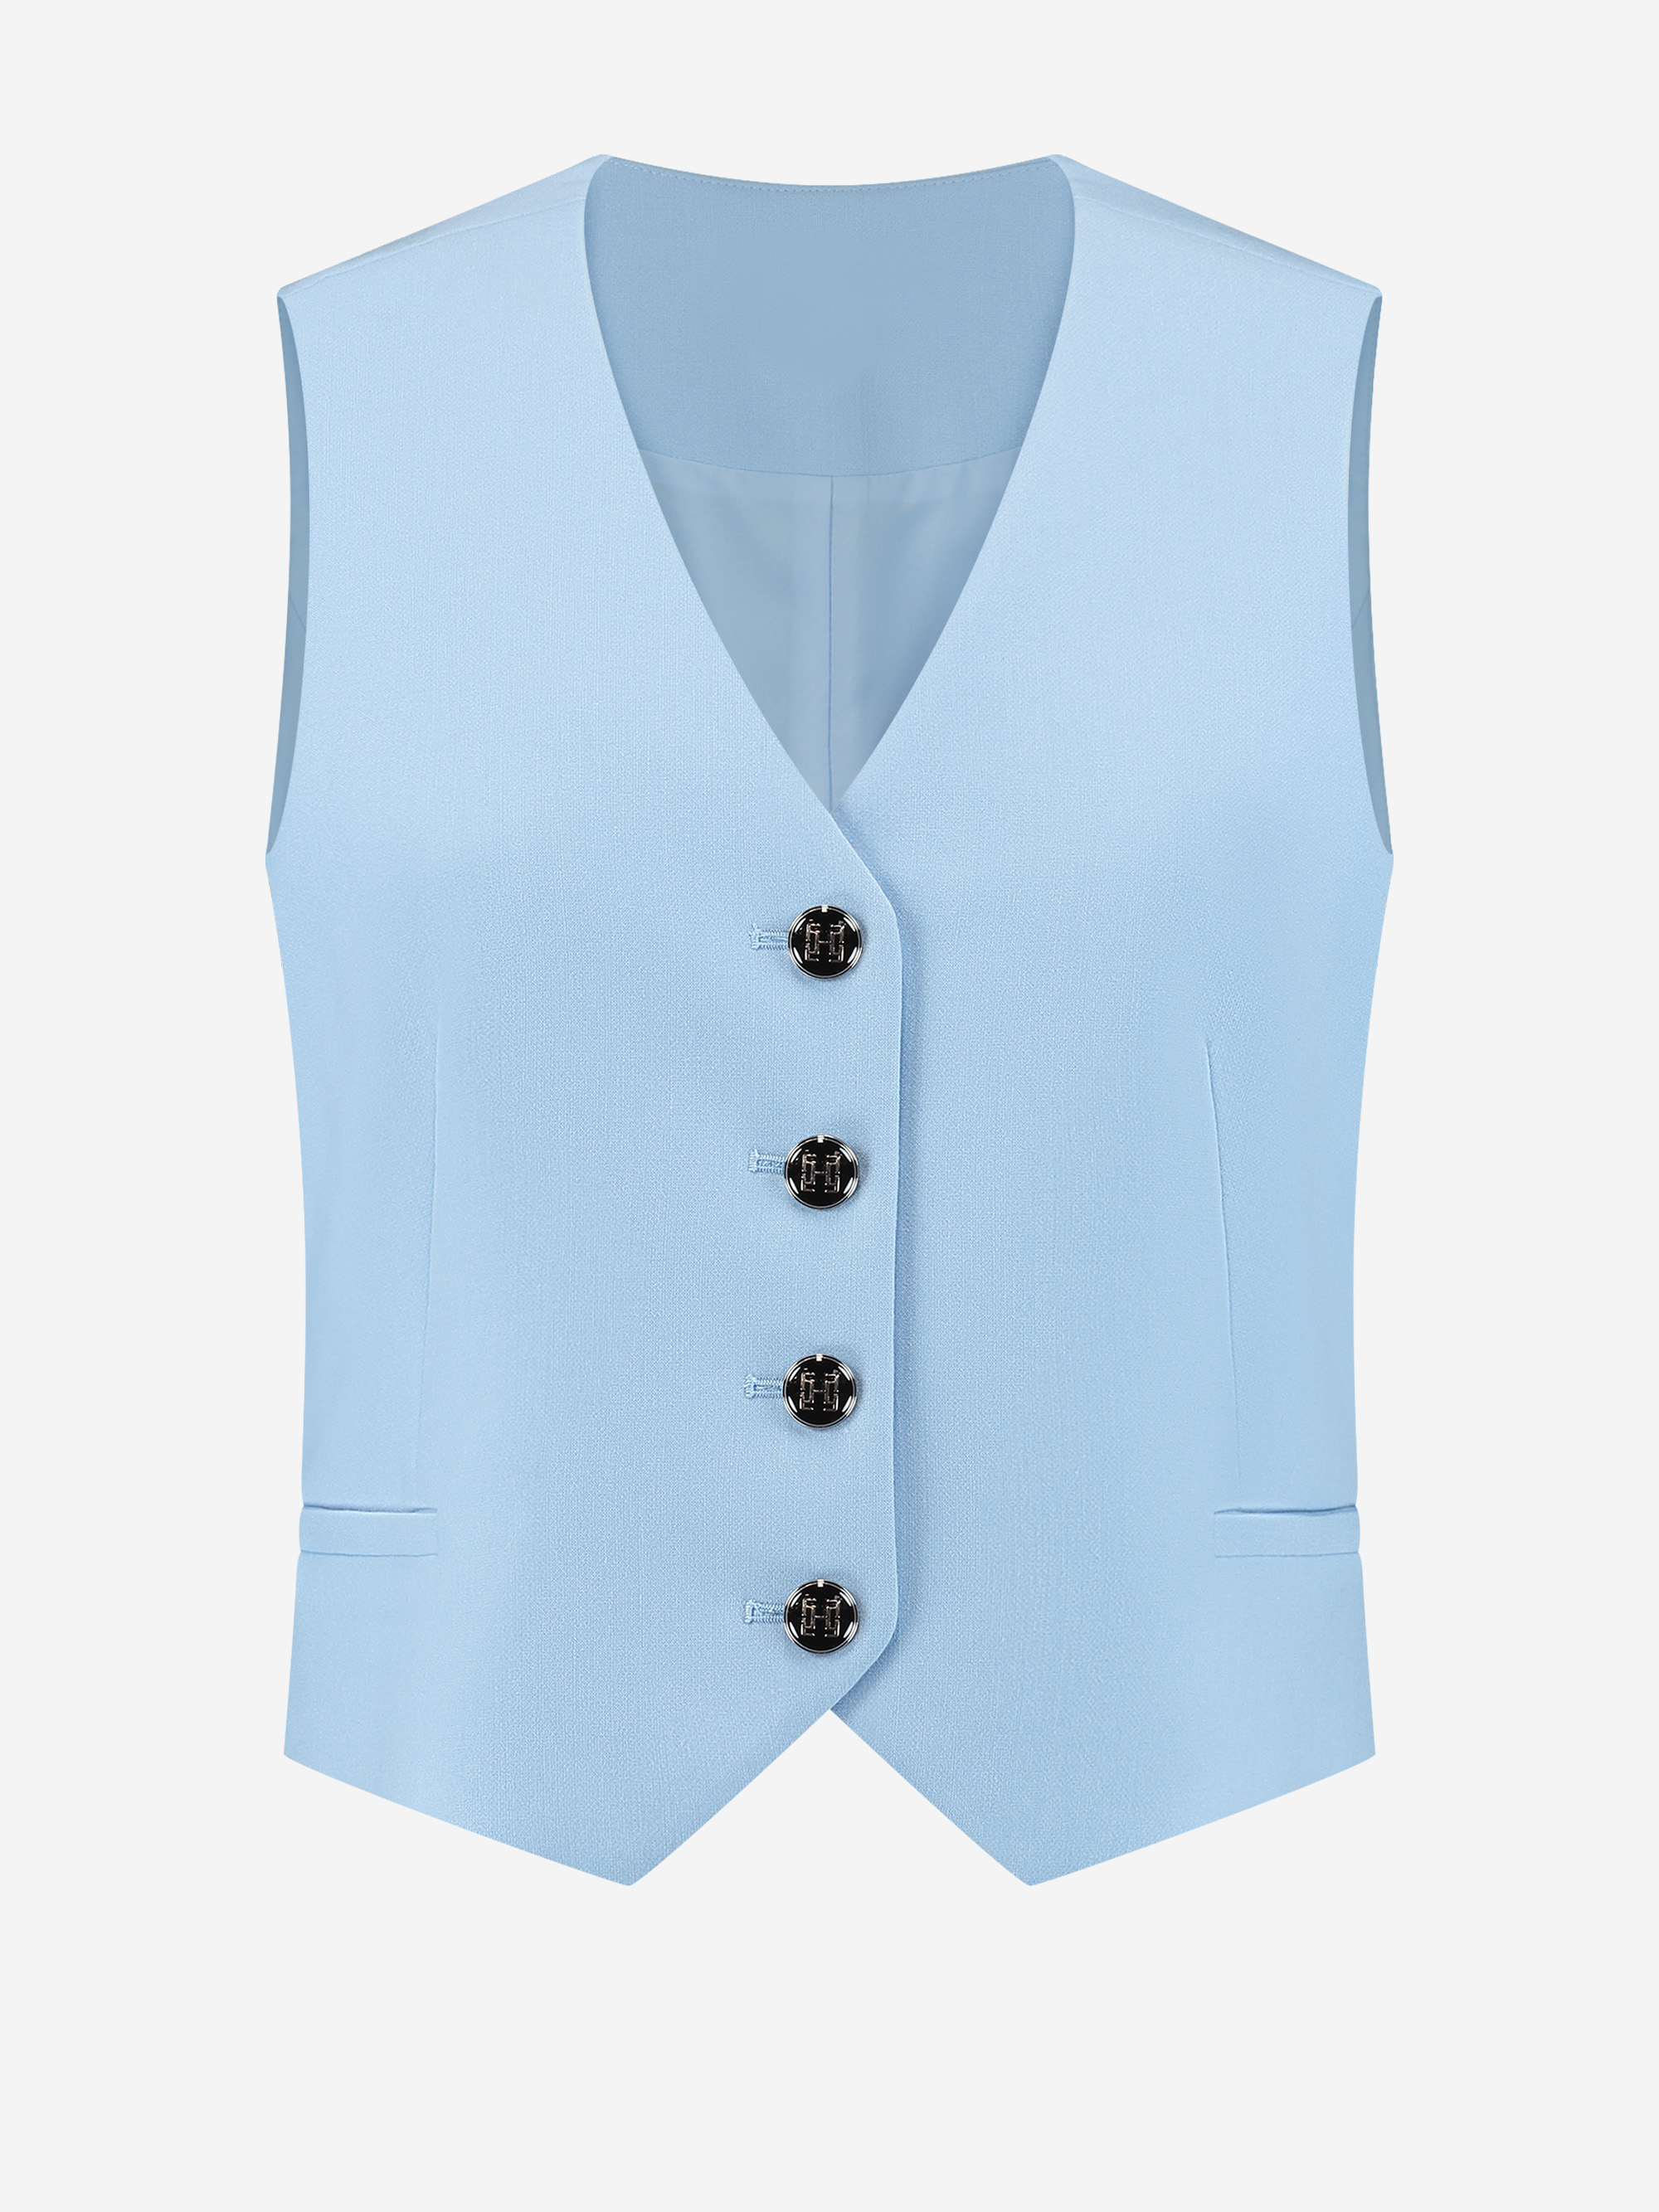 Waistcoat with buttons